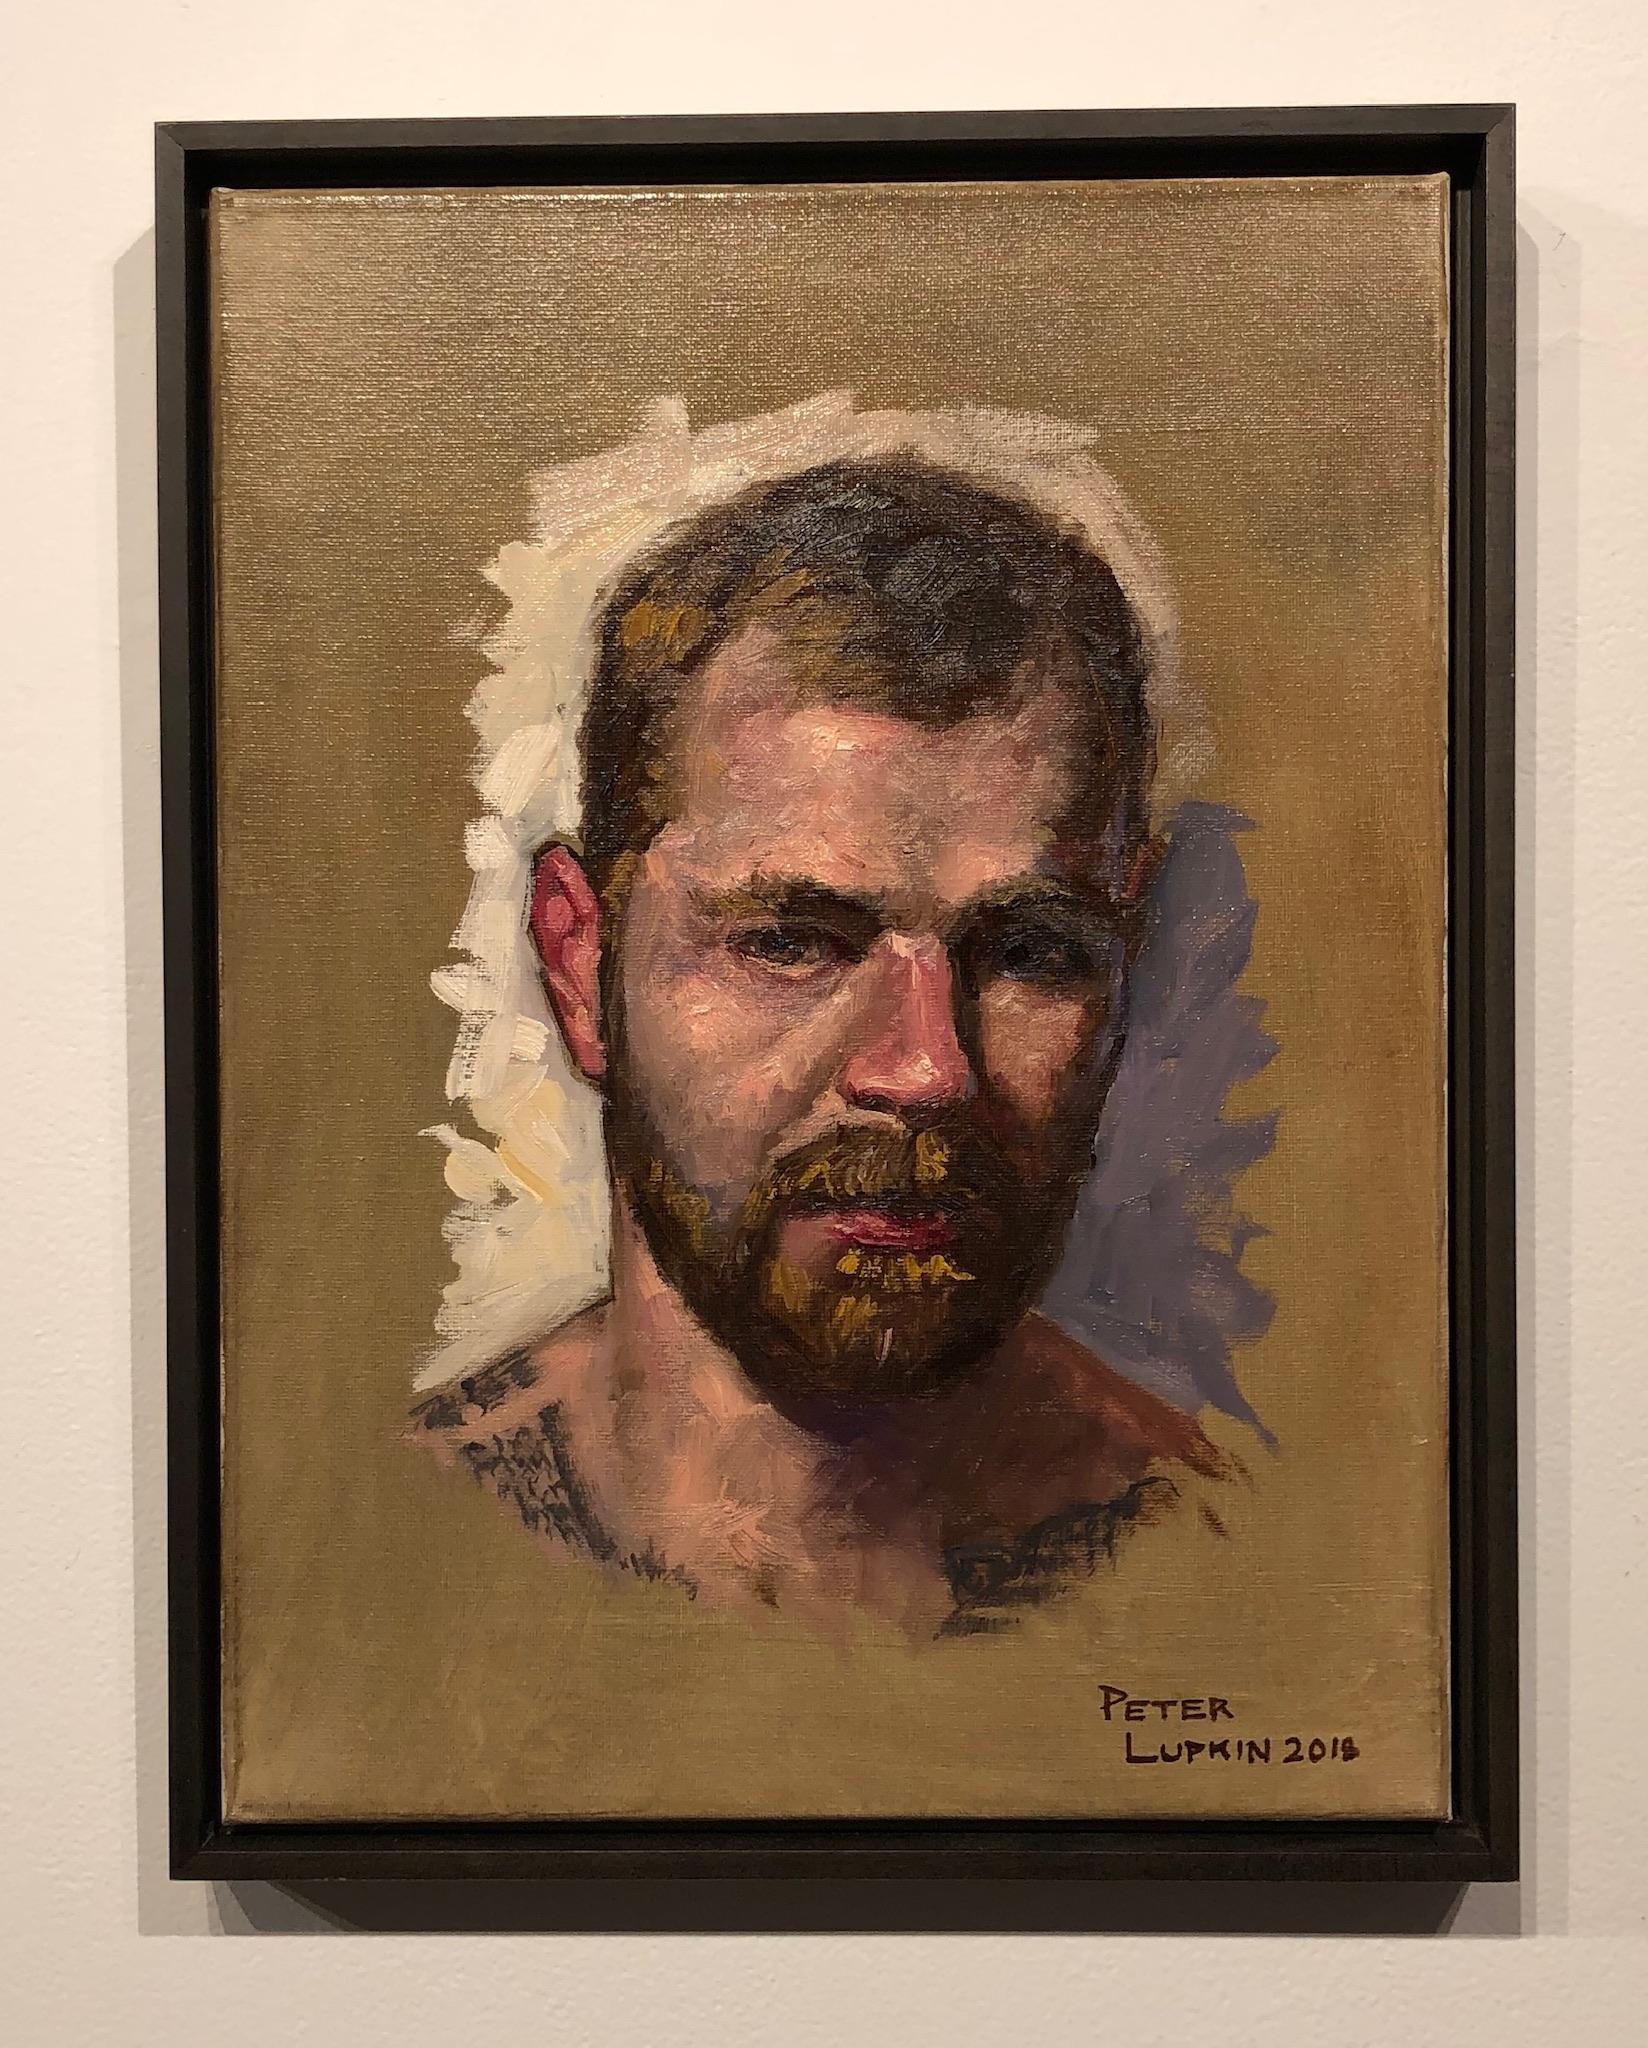 Doug, Male Figure with Tattoos, Full Beard and Mustache, Oil on Canvas, Framed – Painting von Peter Lupkin